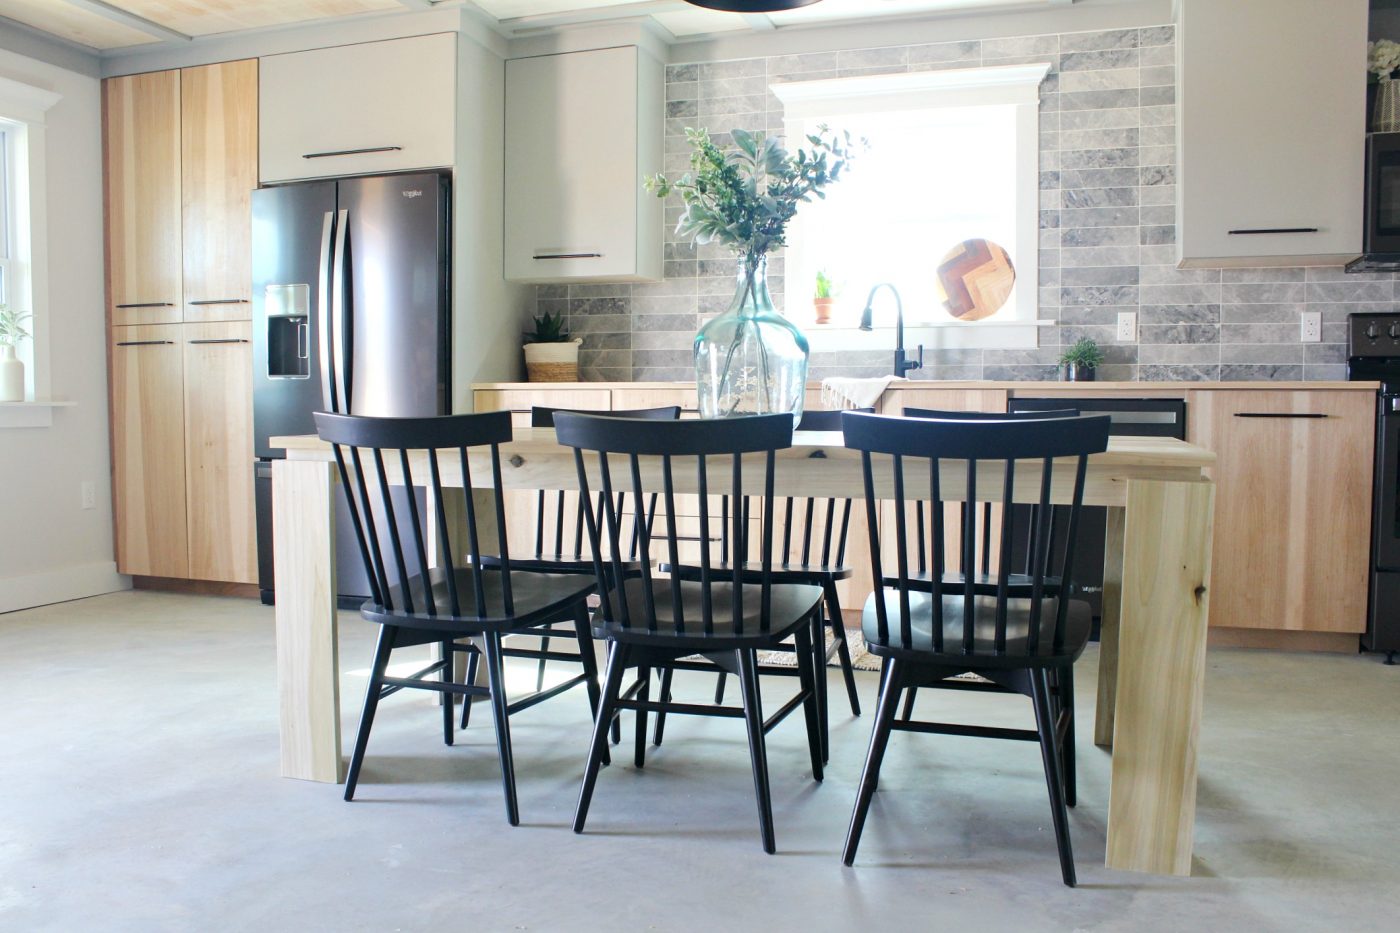 Contemporary modern dining table in kitchen with black chairs and grey backsplash